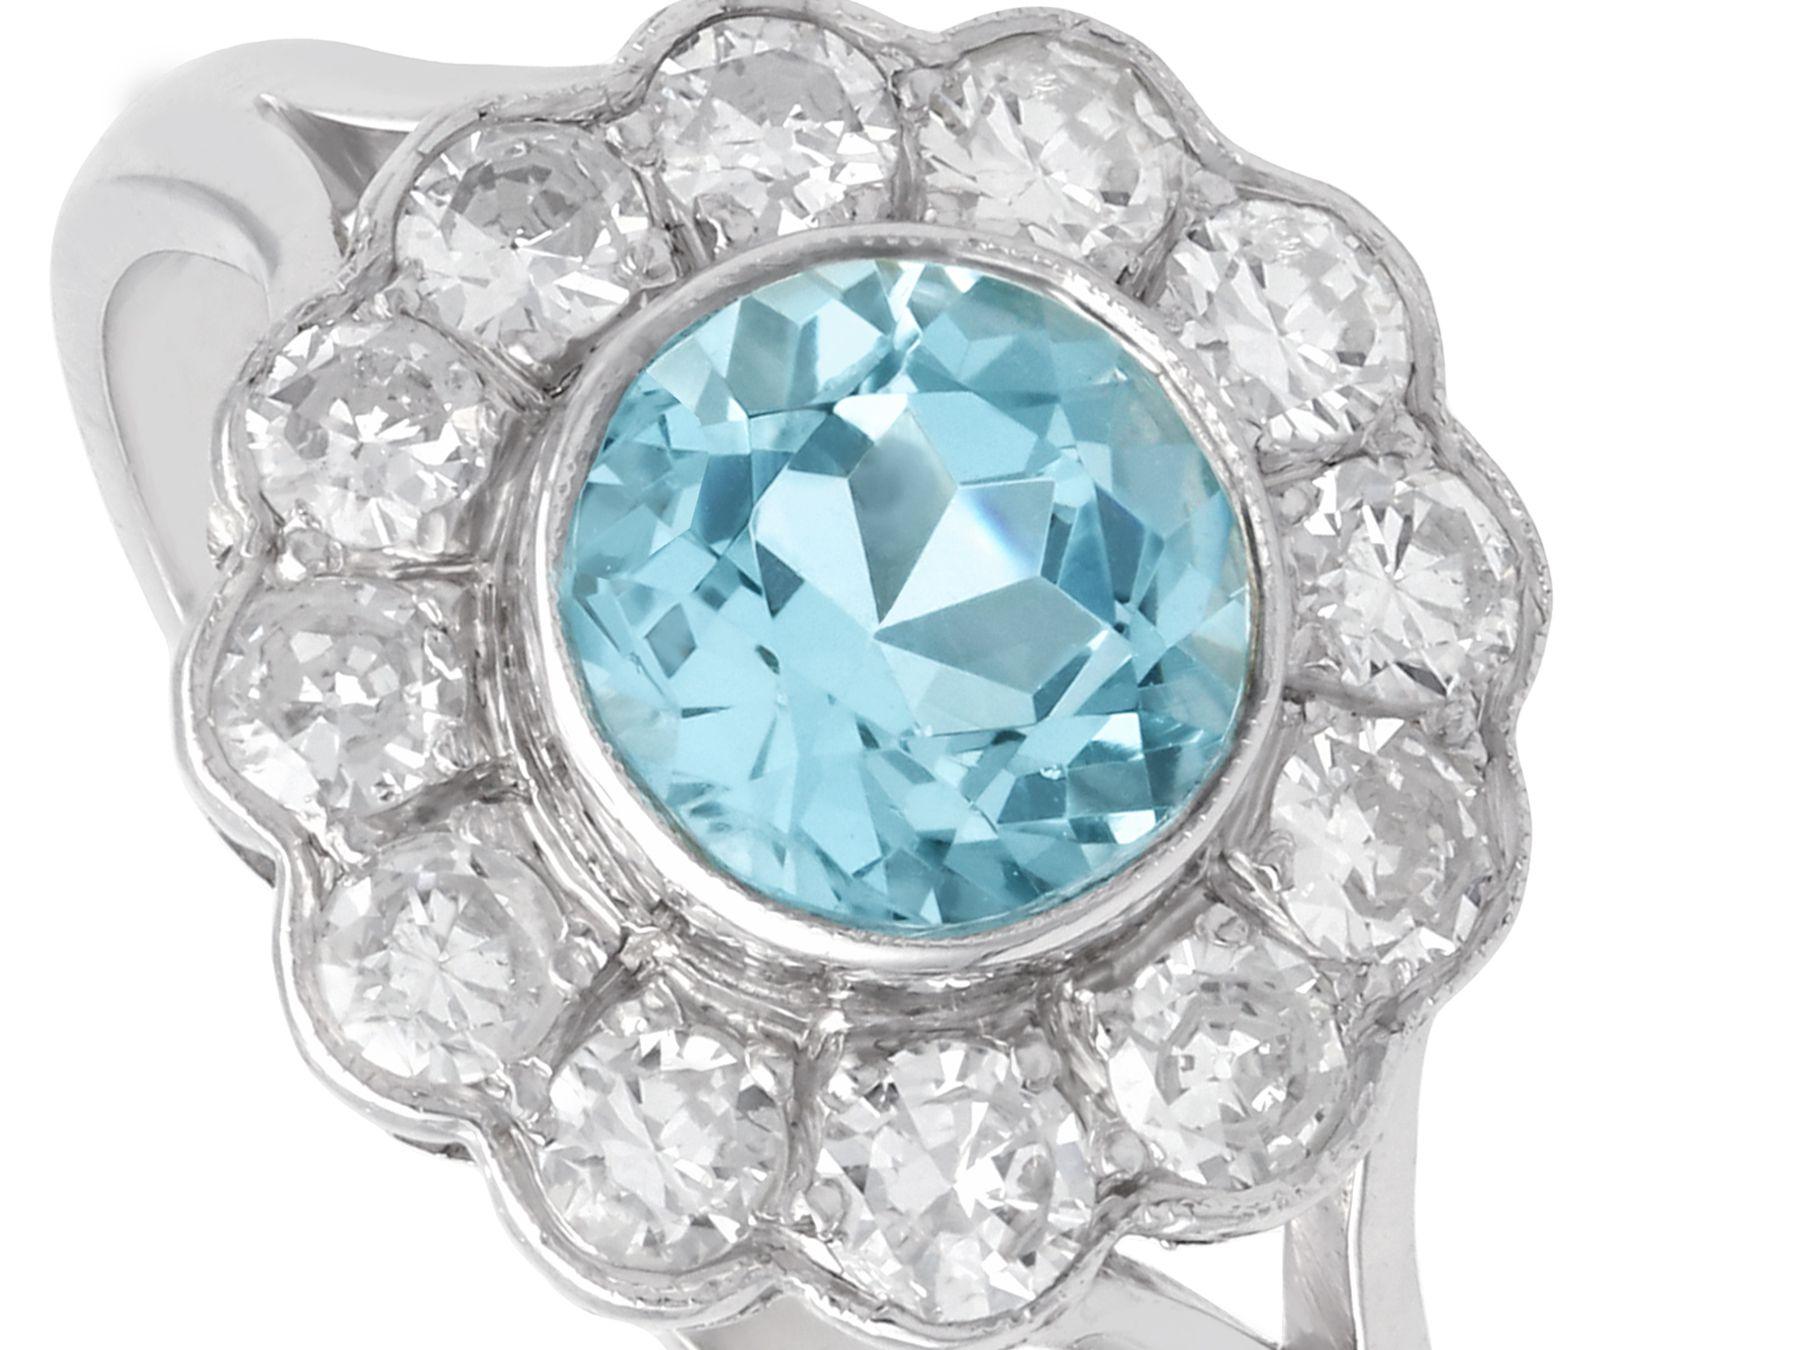 1950s 1.34 Carat Aquamarine and Diamond White Gold Cluster Ring In Excellent Condition For Sale In Jesmond, Newcastle Upon Tyne